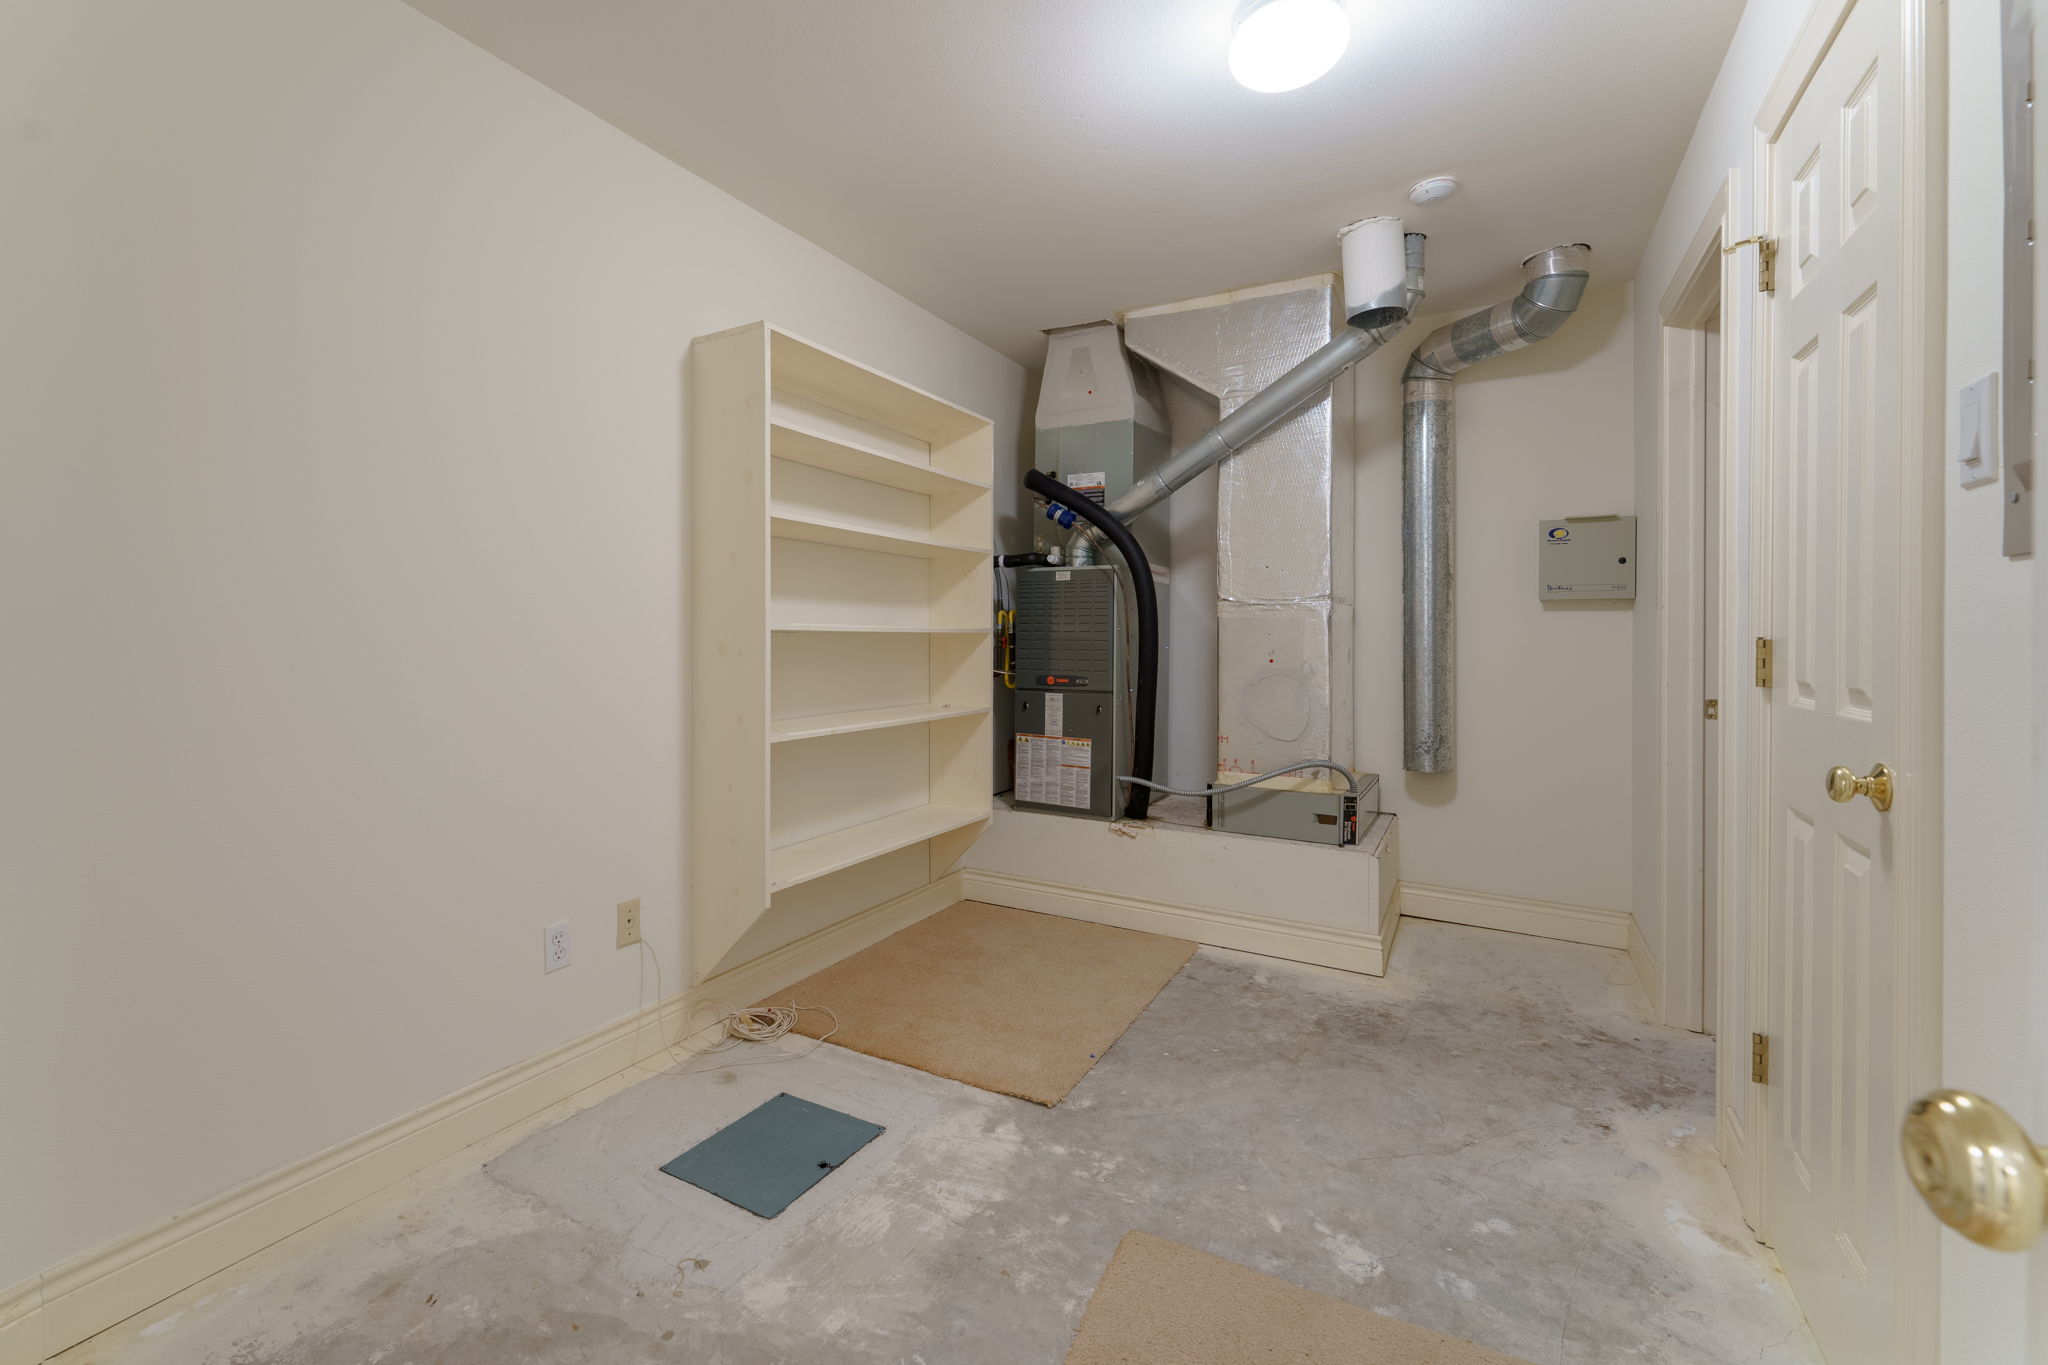 Extra storge room with floor safe and closet